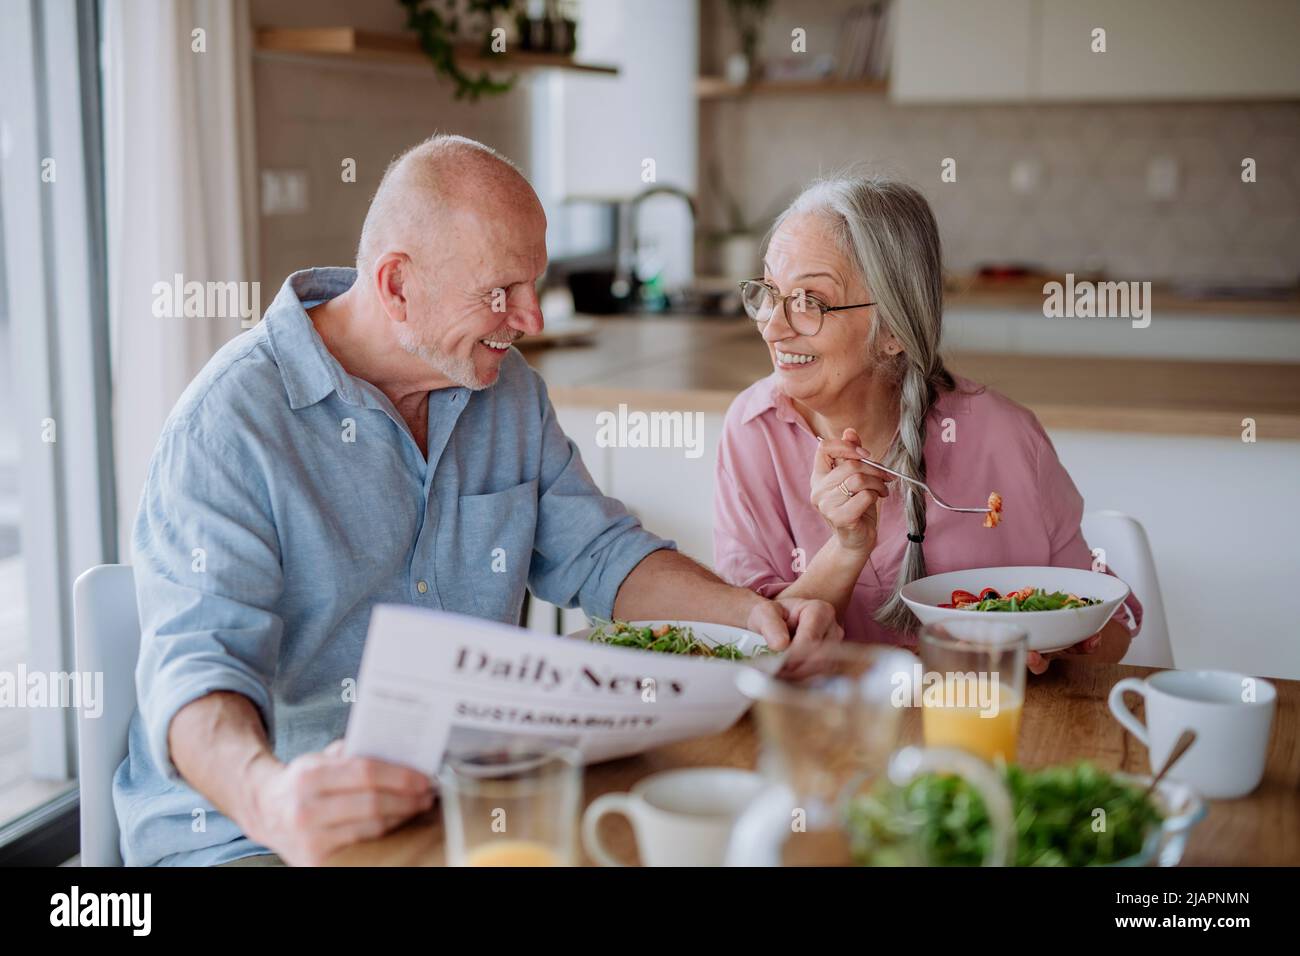 Happy senior couple eating dinner together at home. Stock Photo